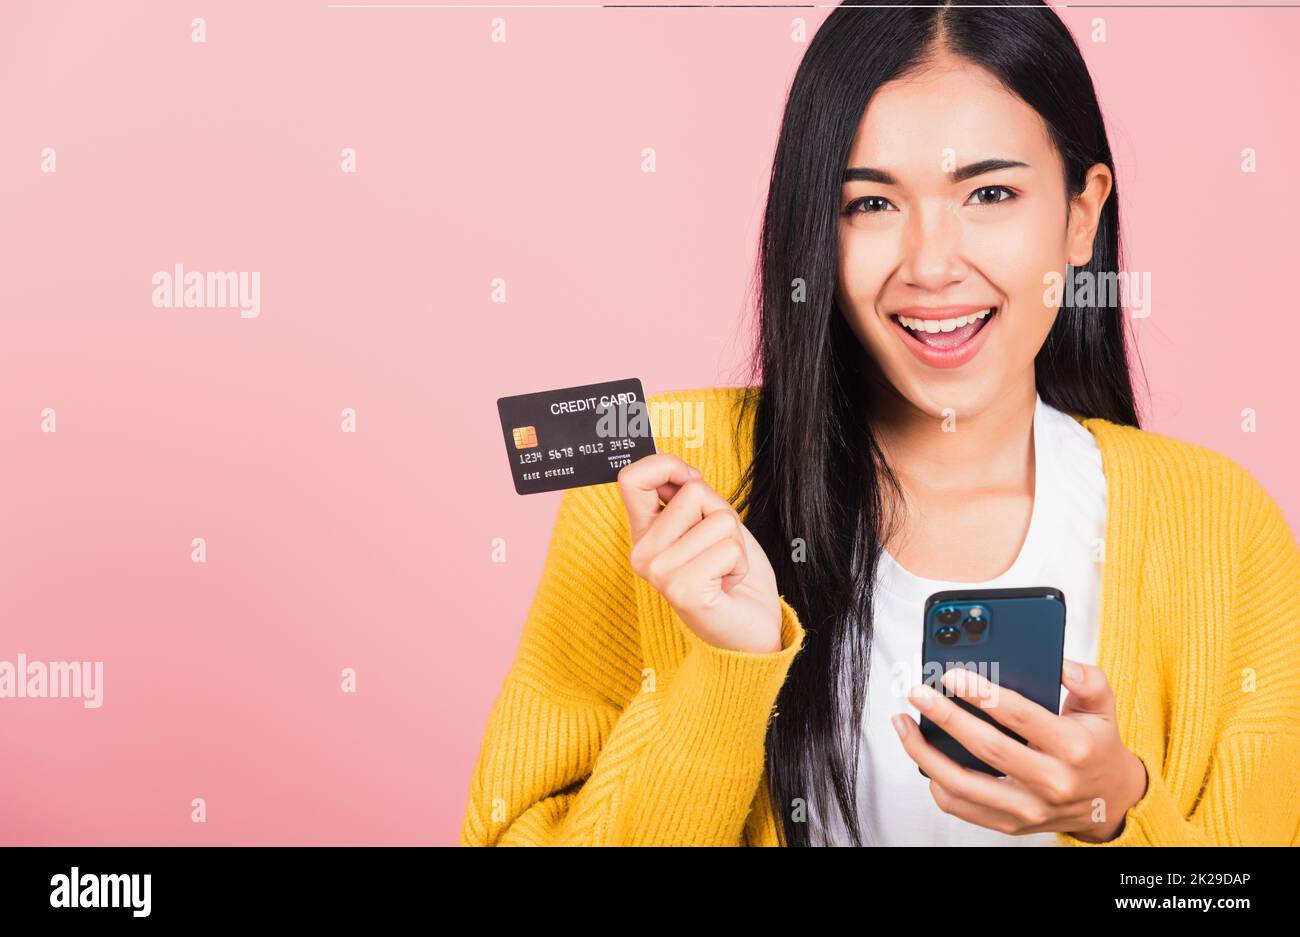 Happy Asian portrait beautiful cute young woman excited smiling hold mobile phone and plastic debit credit bank card, studio shot isolated on pink background, female using smartphone online shopping Stock Photo